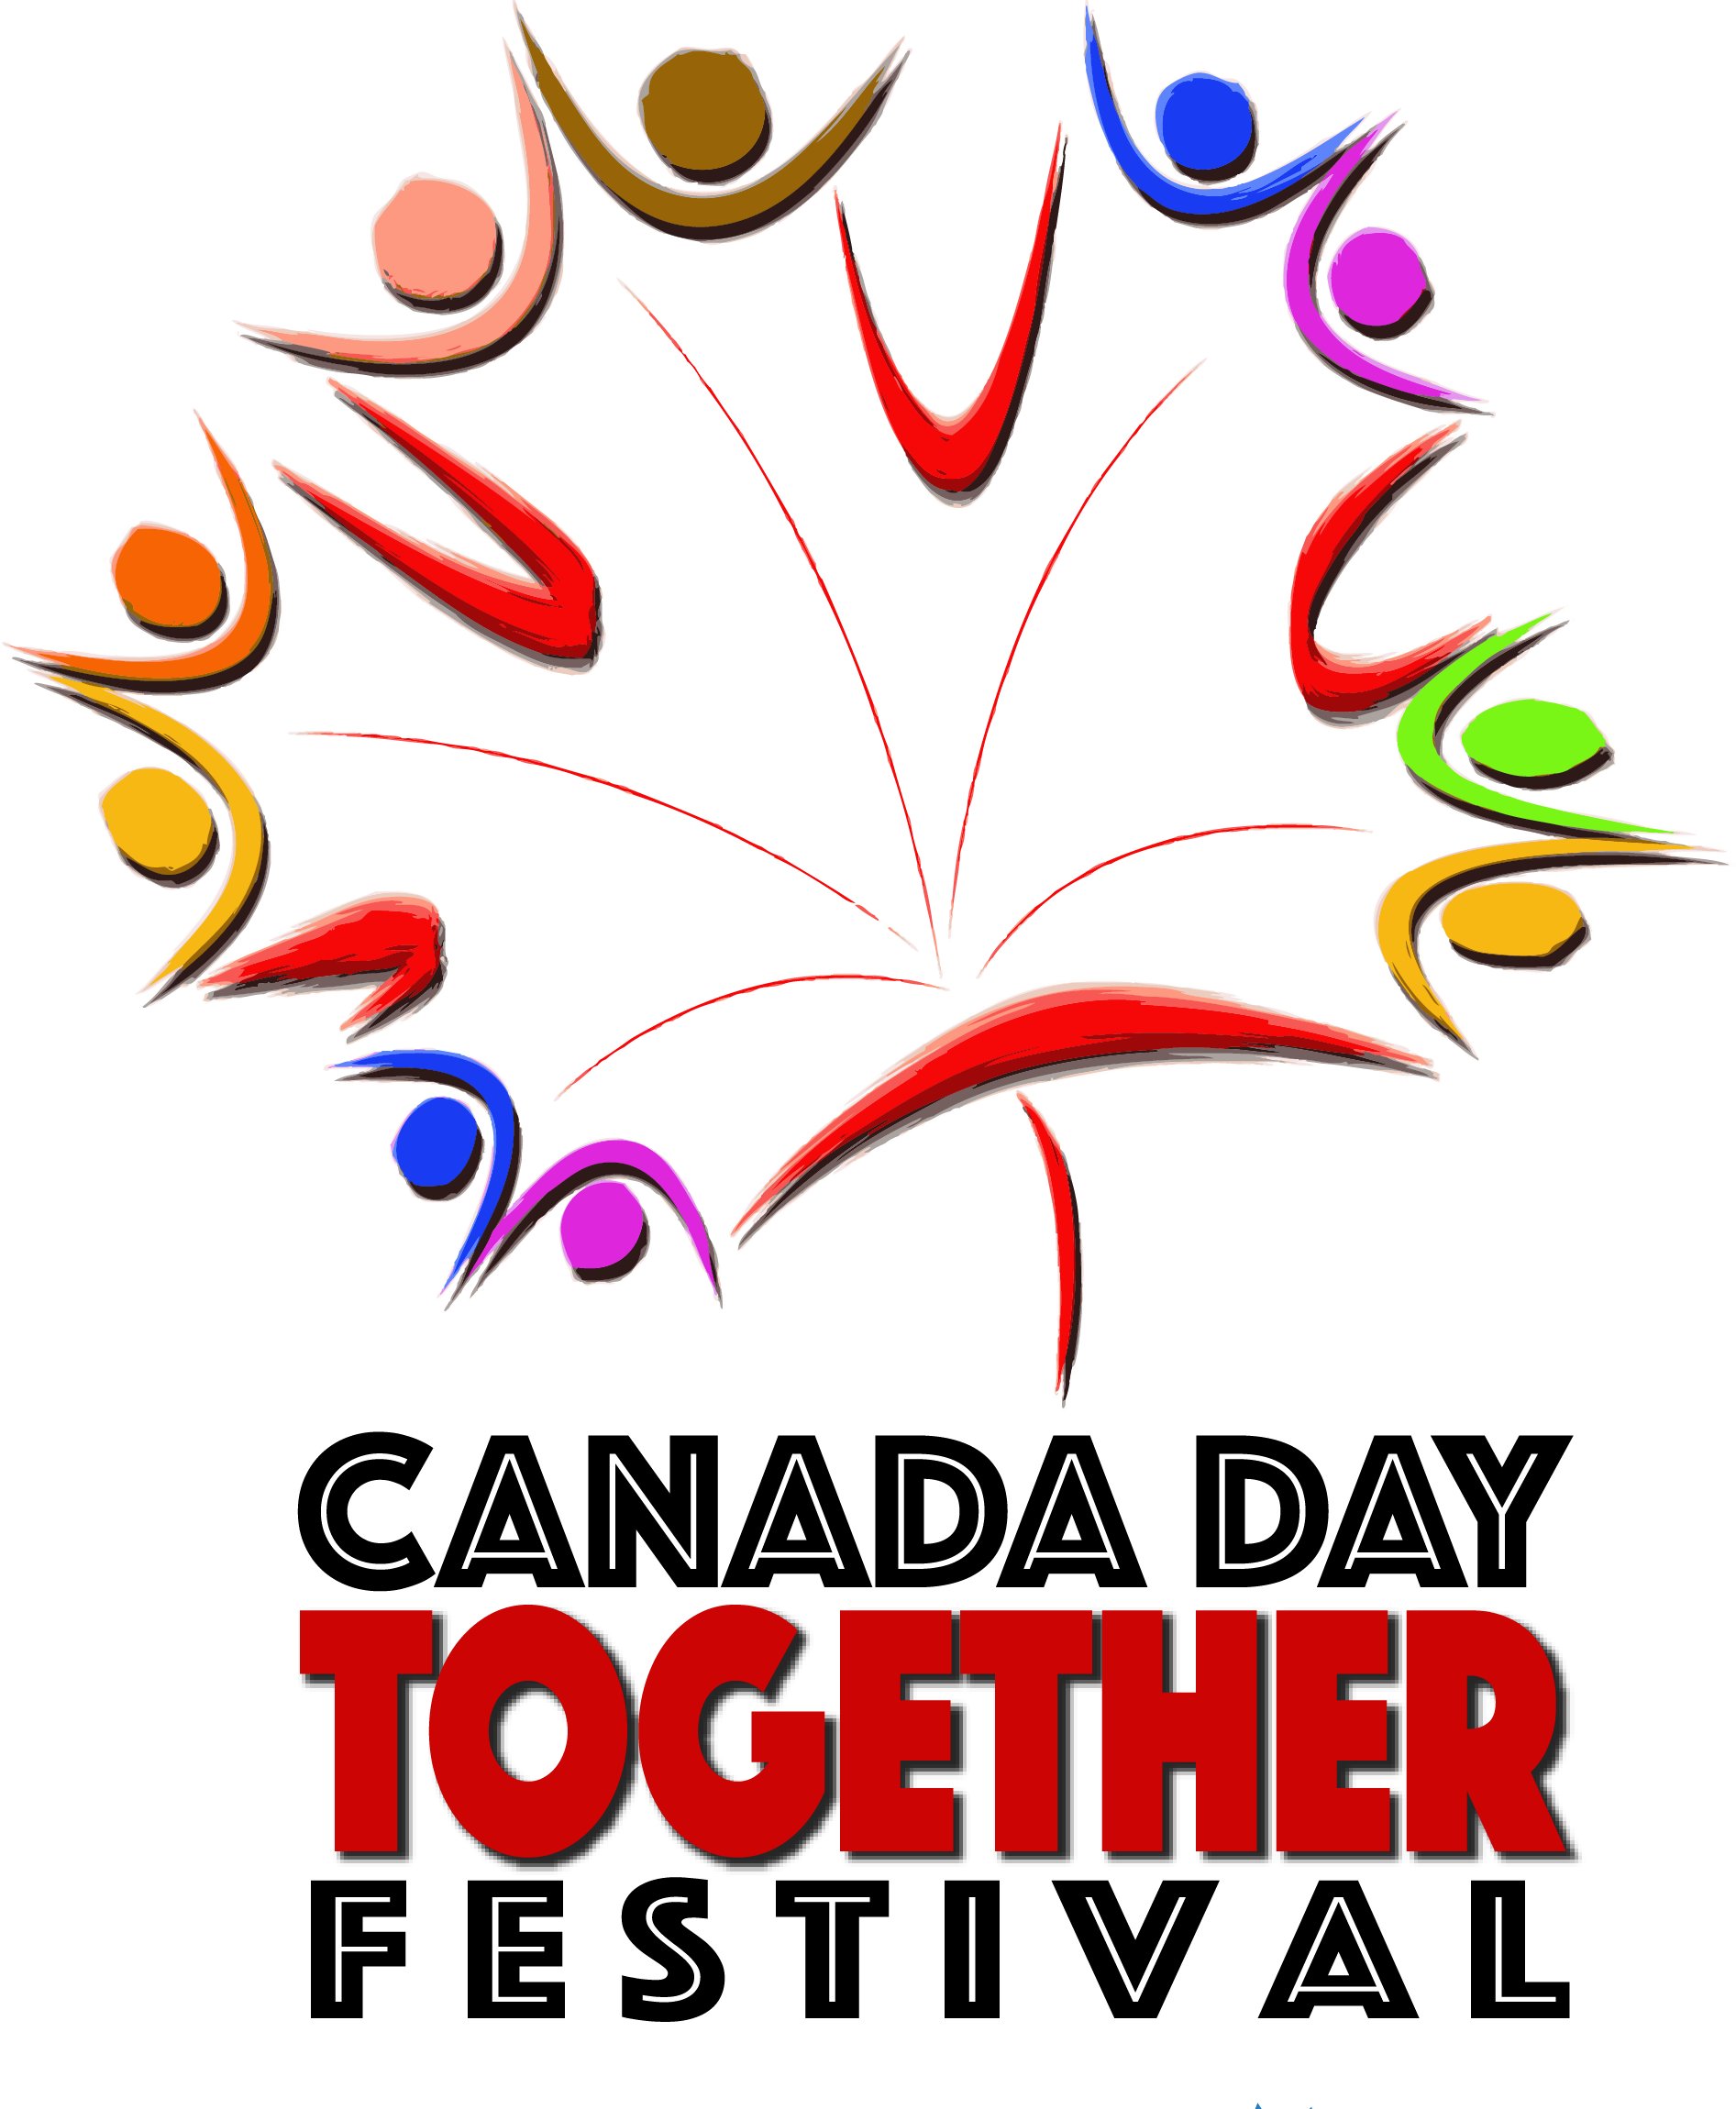 Canada Day Together Festival at Churchill Meadows Community Common Google image from http://canadadaytogether.ca/